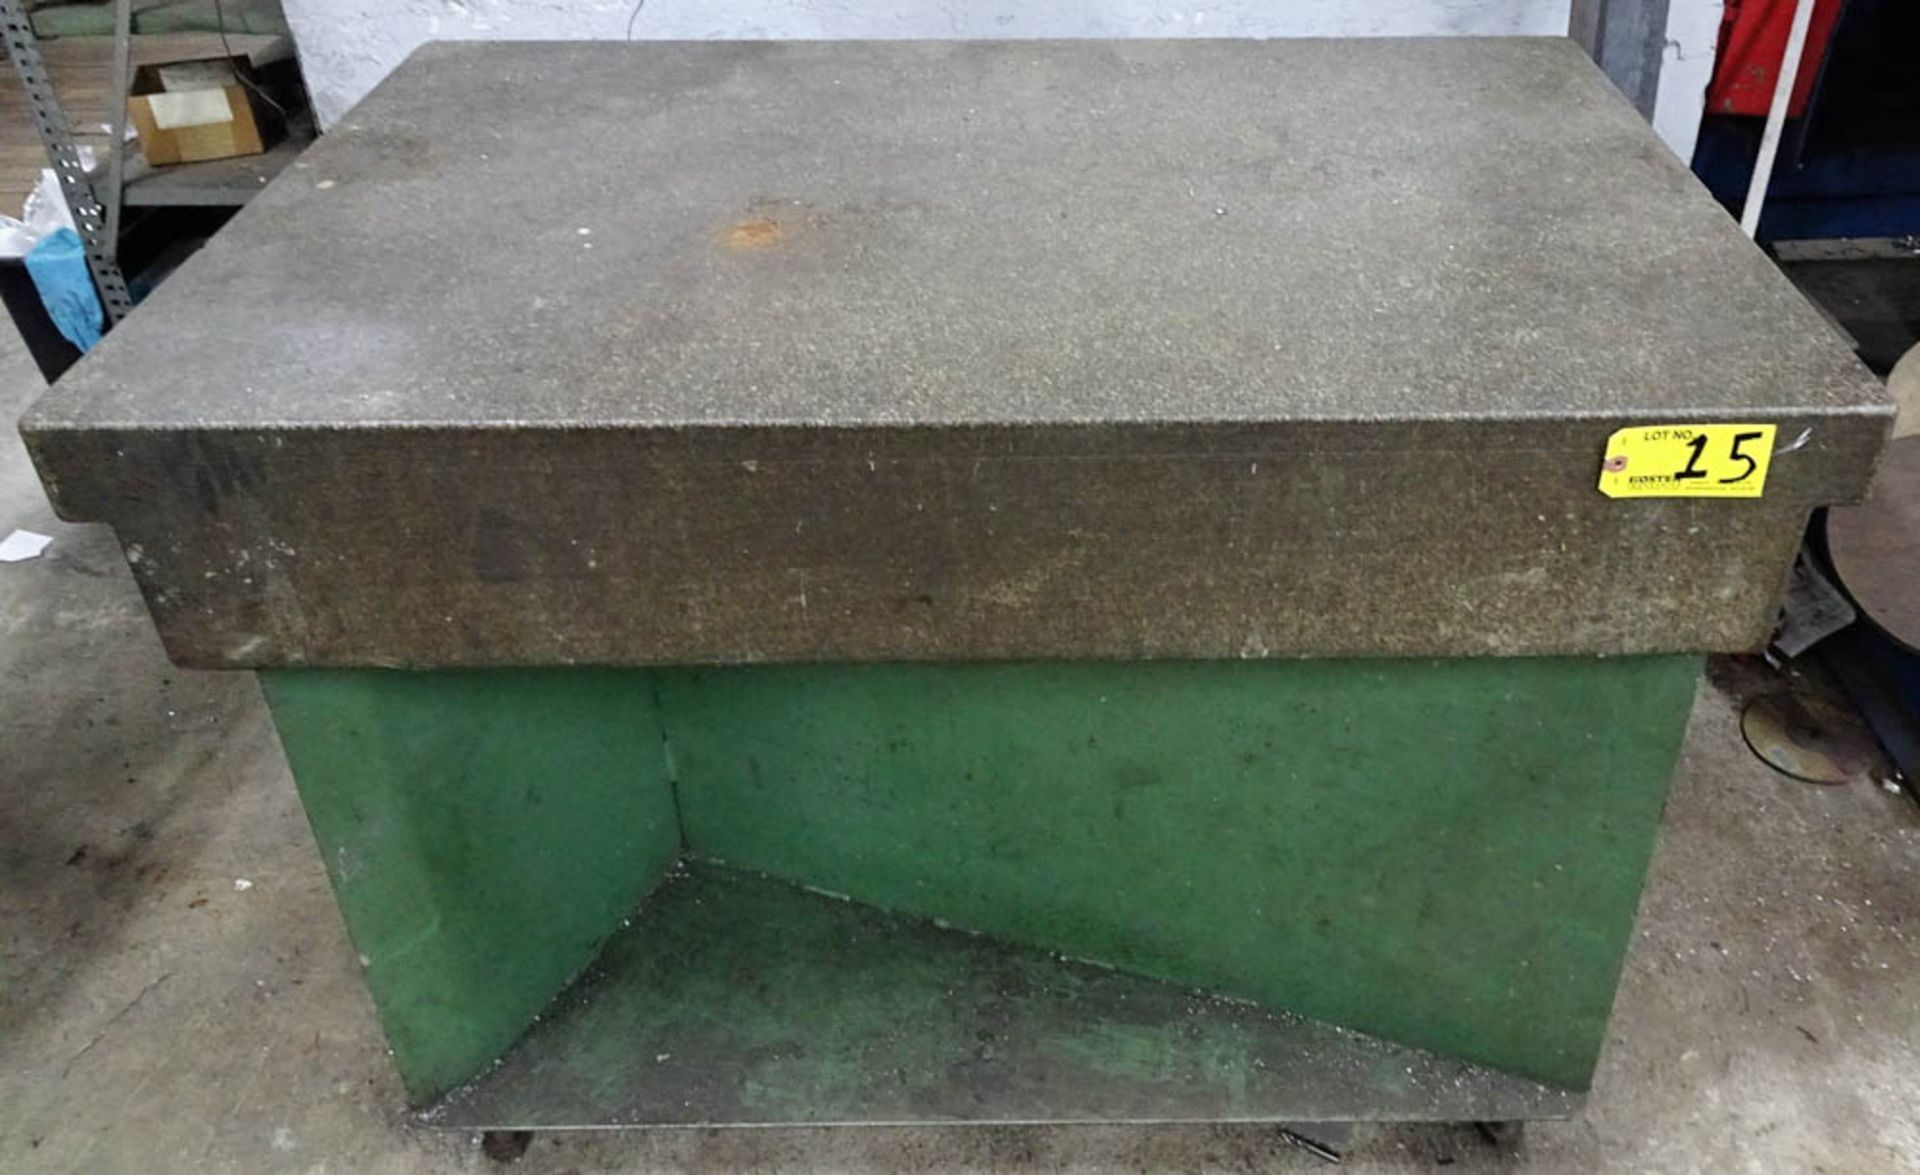 48" X 30" X 8" DOUBLE DROP GRANITE SURFACE PLATE WITH STAND